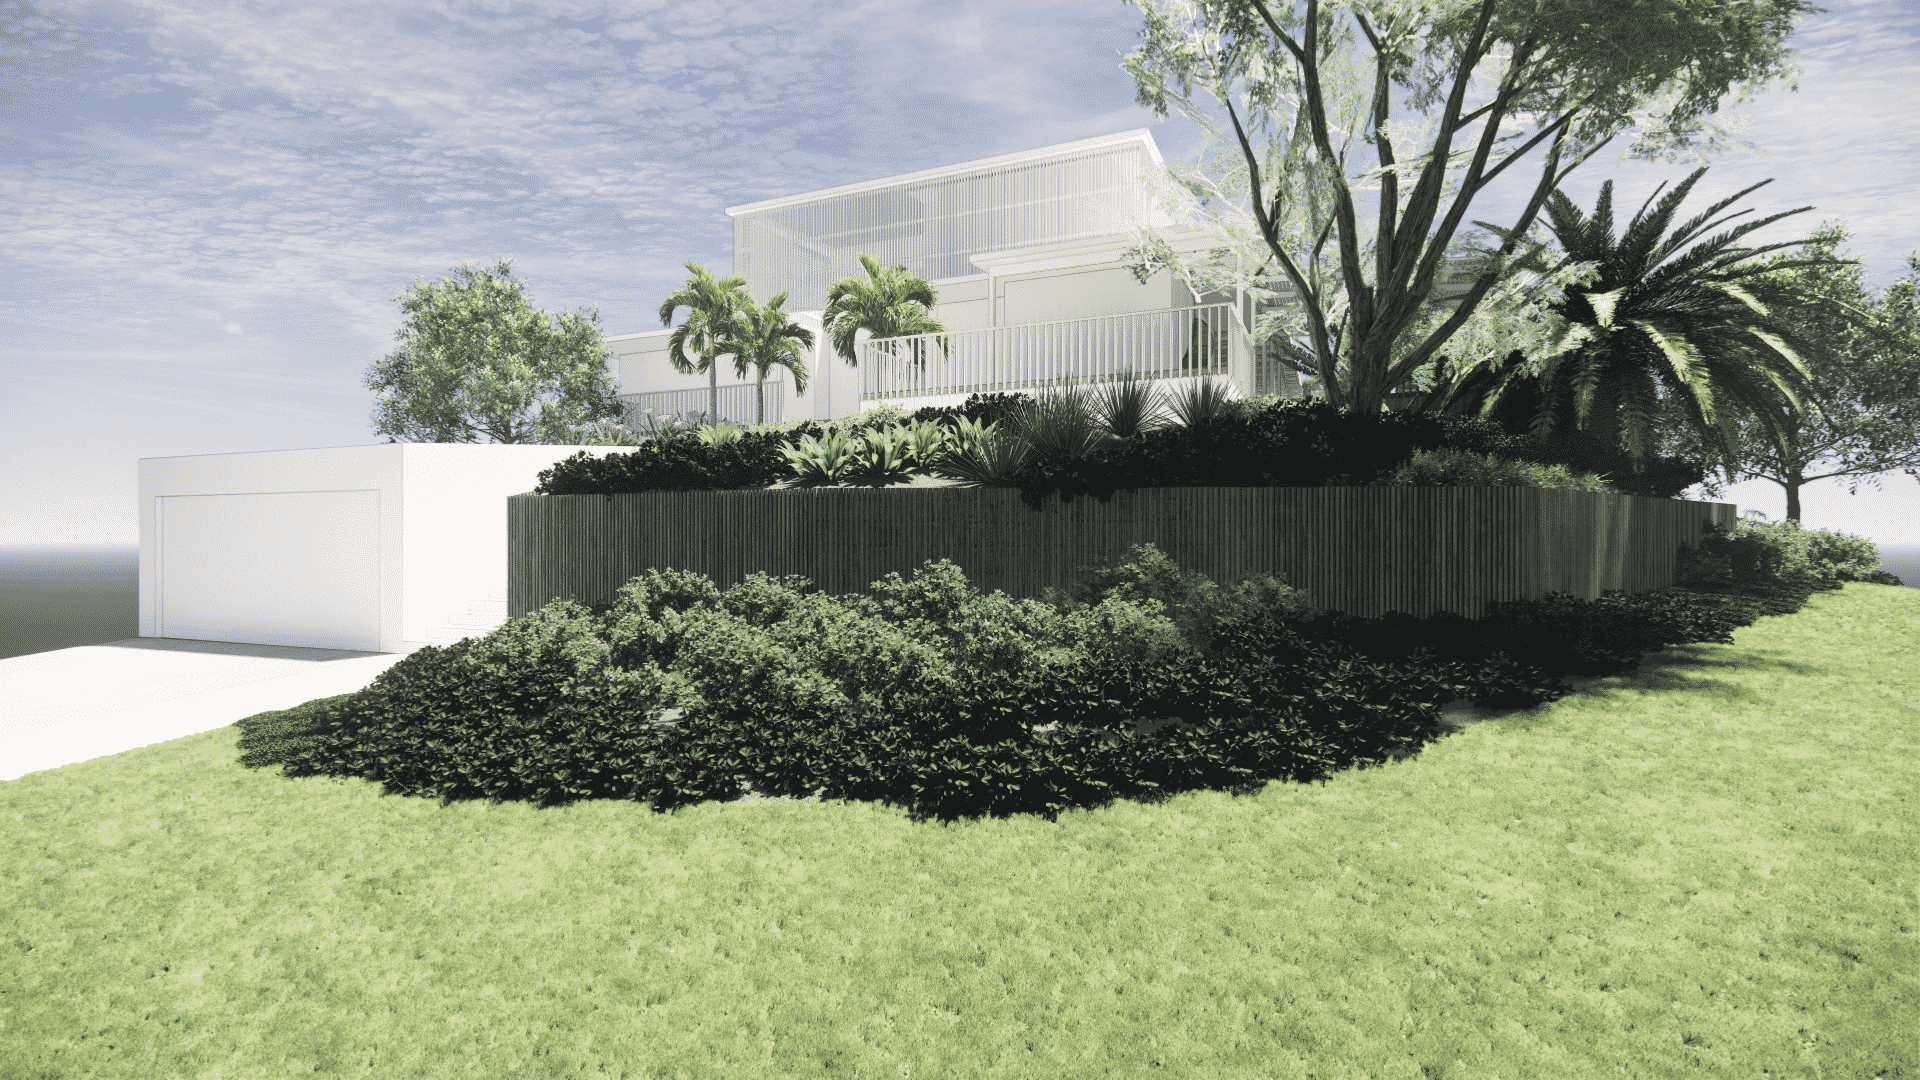 A landscape design render of the front of a white multi-level home, the garden is planted with a mix of hardy plants in neutral tones.